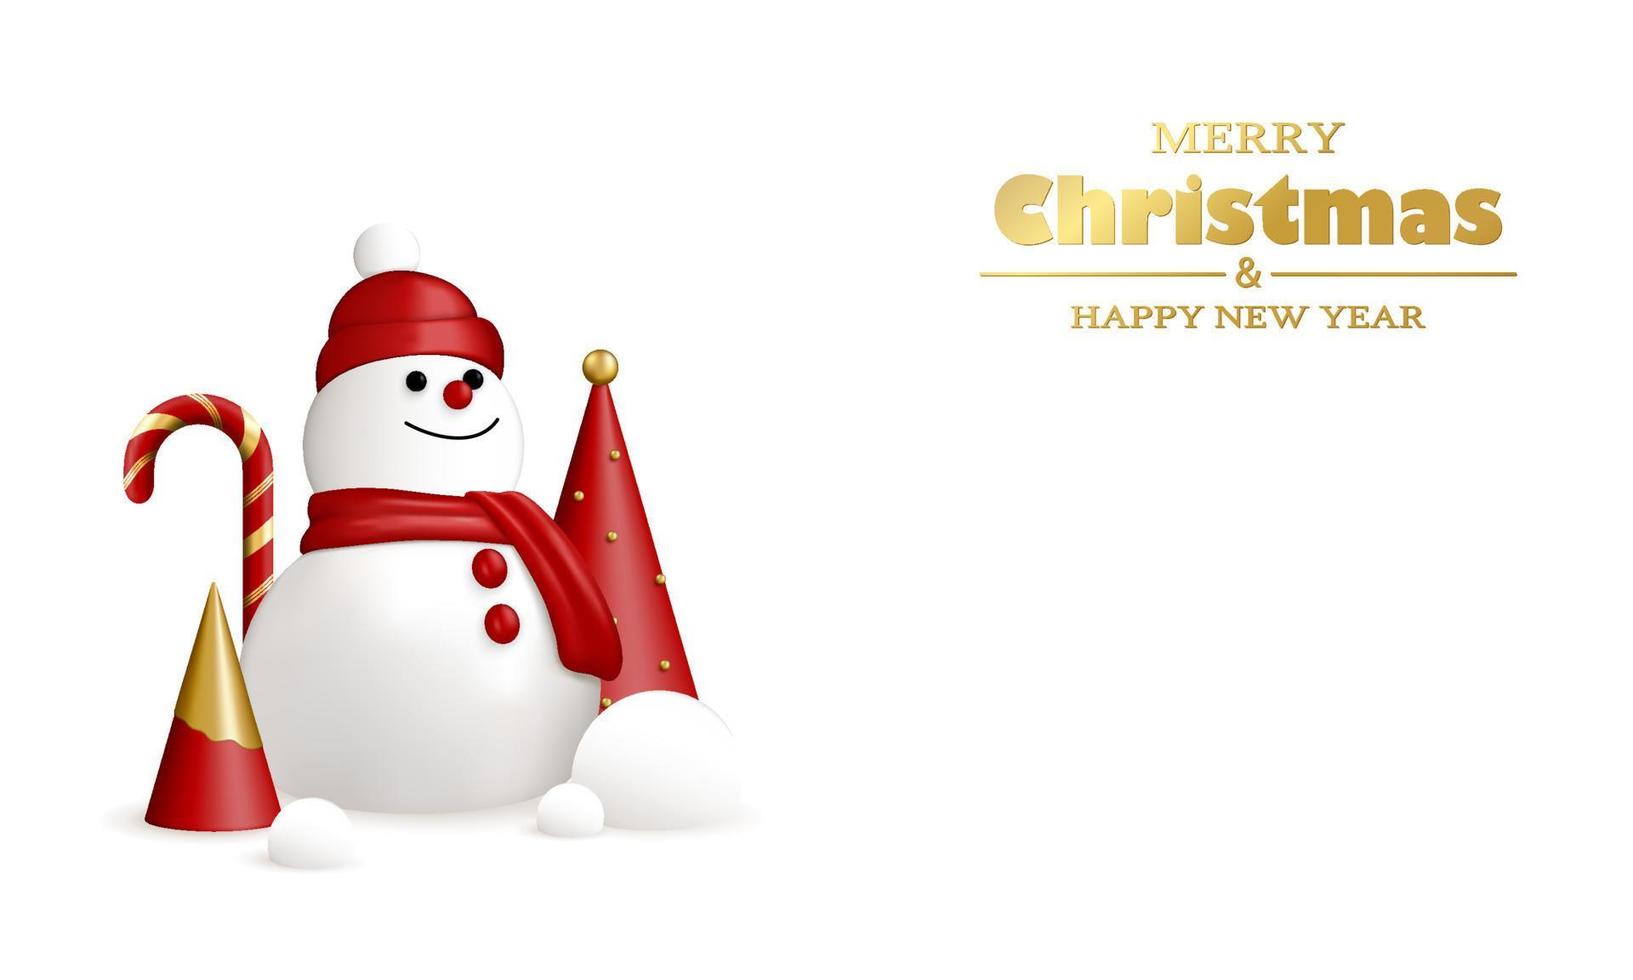 Merry Christmas and Happy New Year background. White, red and gold 3D objects. Christmas tree, candy, snowballs and snowman. vector